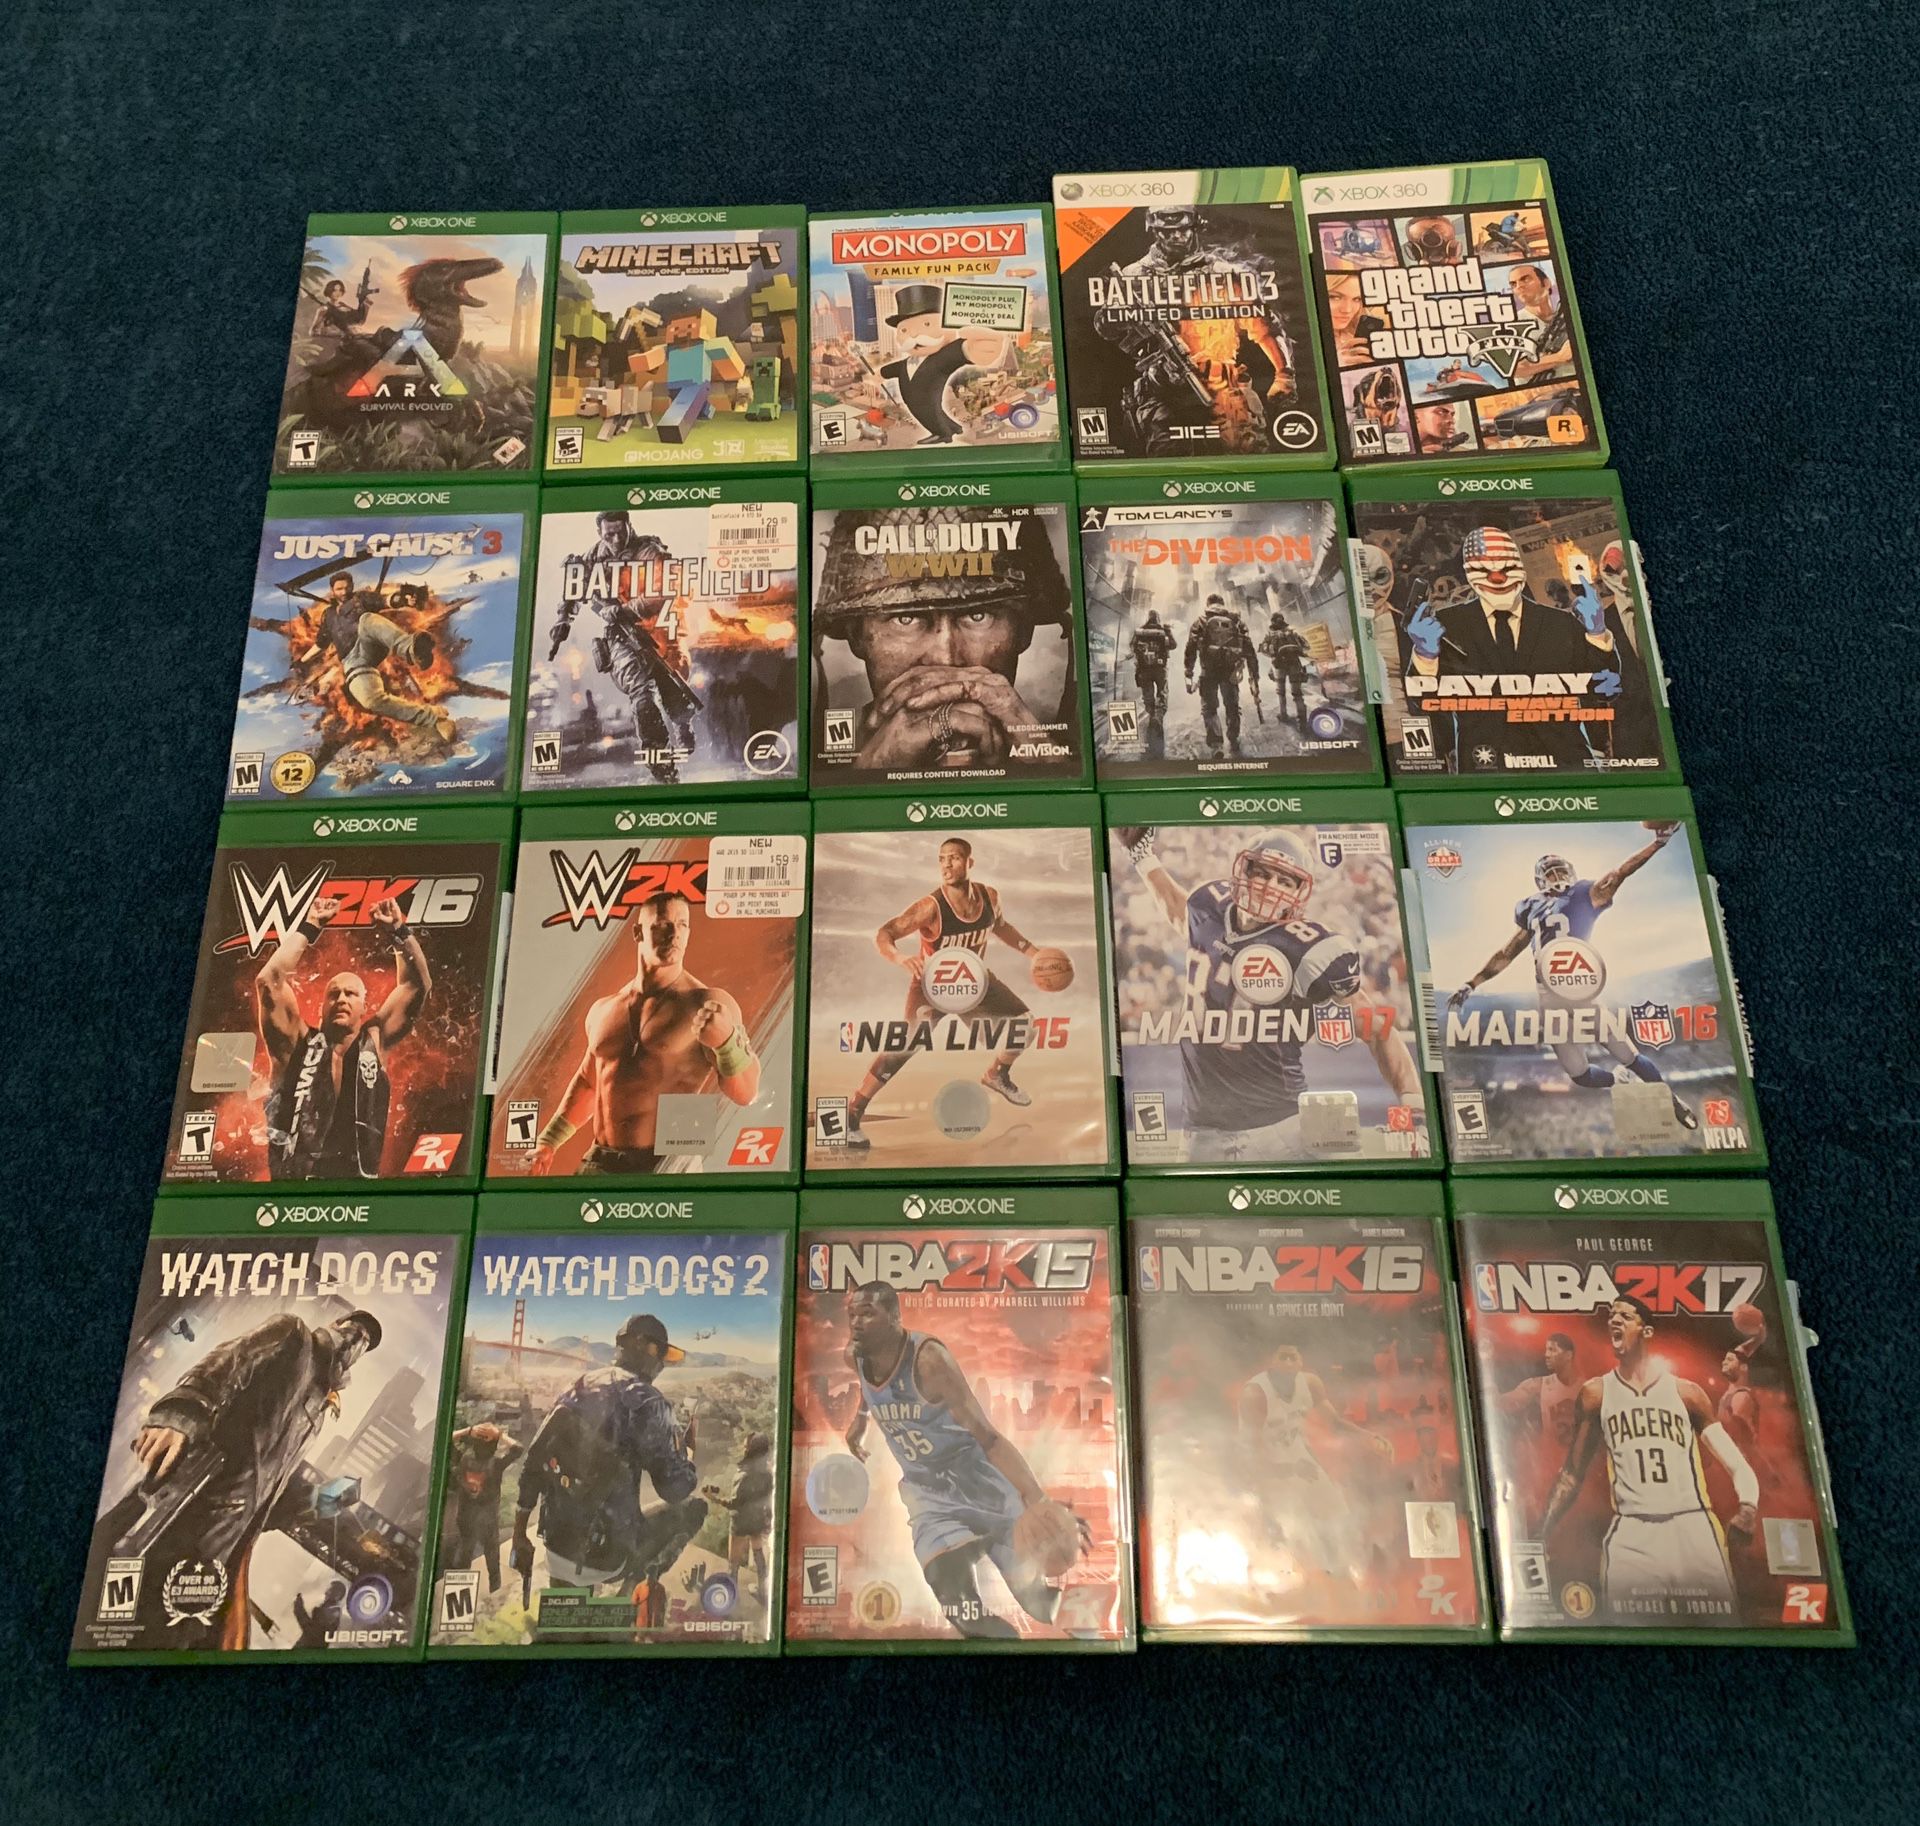 Xbox One, 20 games and 2 Remotes